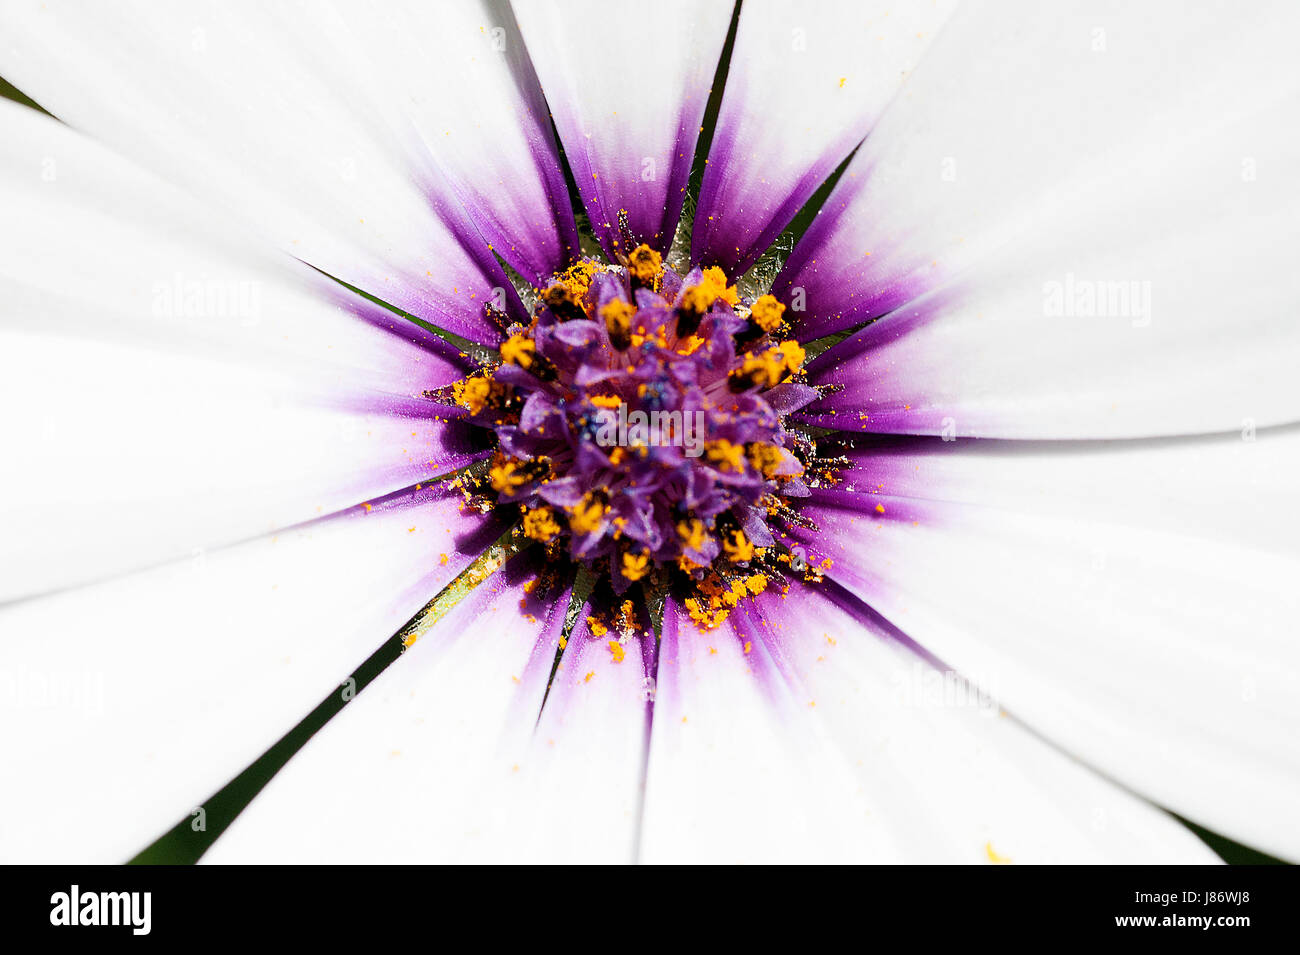 A beautiful white Cape daisy with a purple center covered in yellow pollen on the Greek island of Kefalonia. Stock Photo